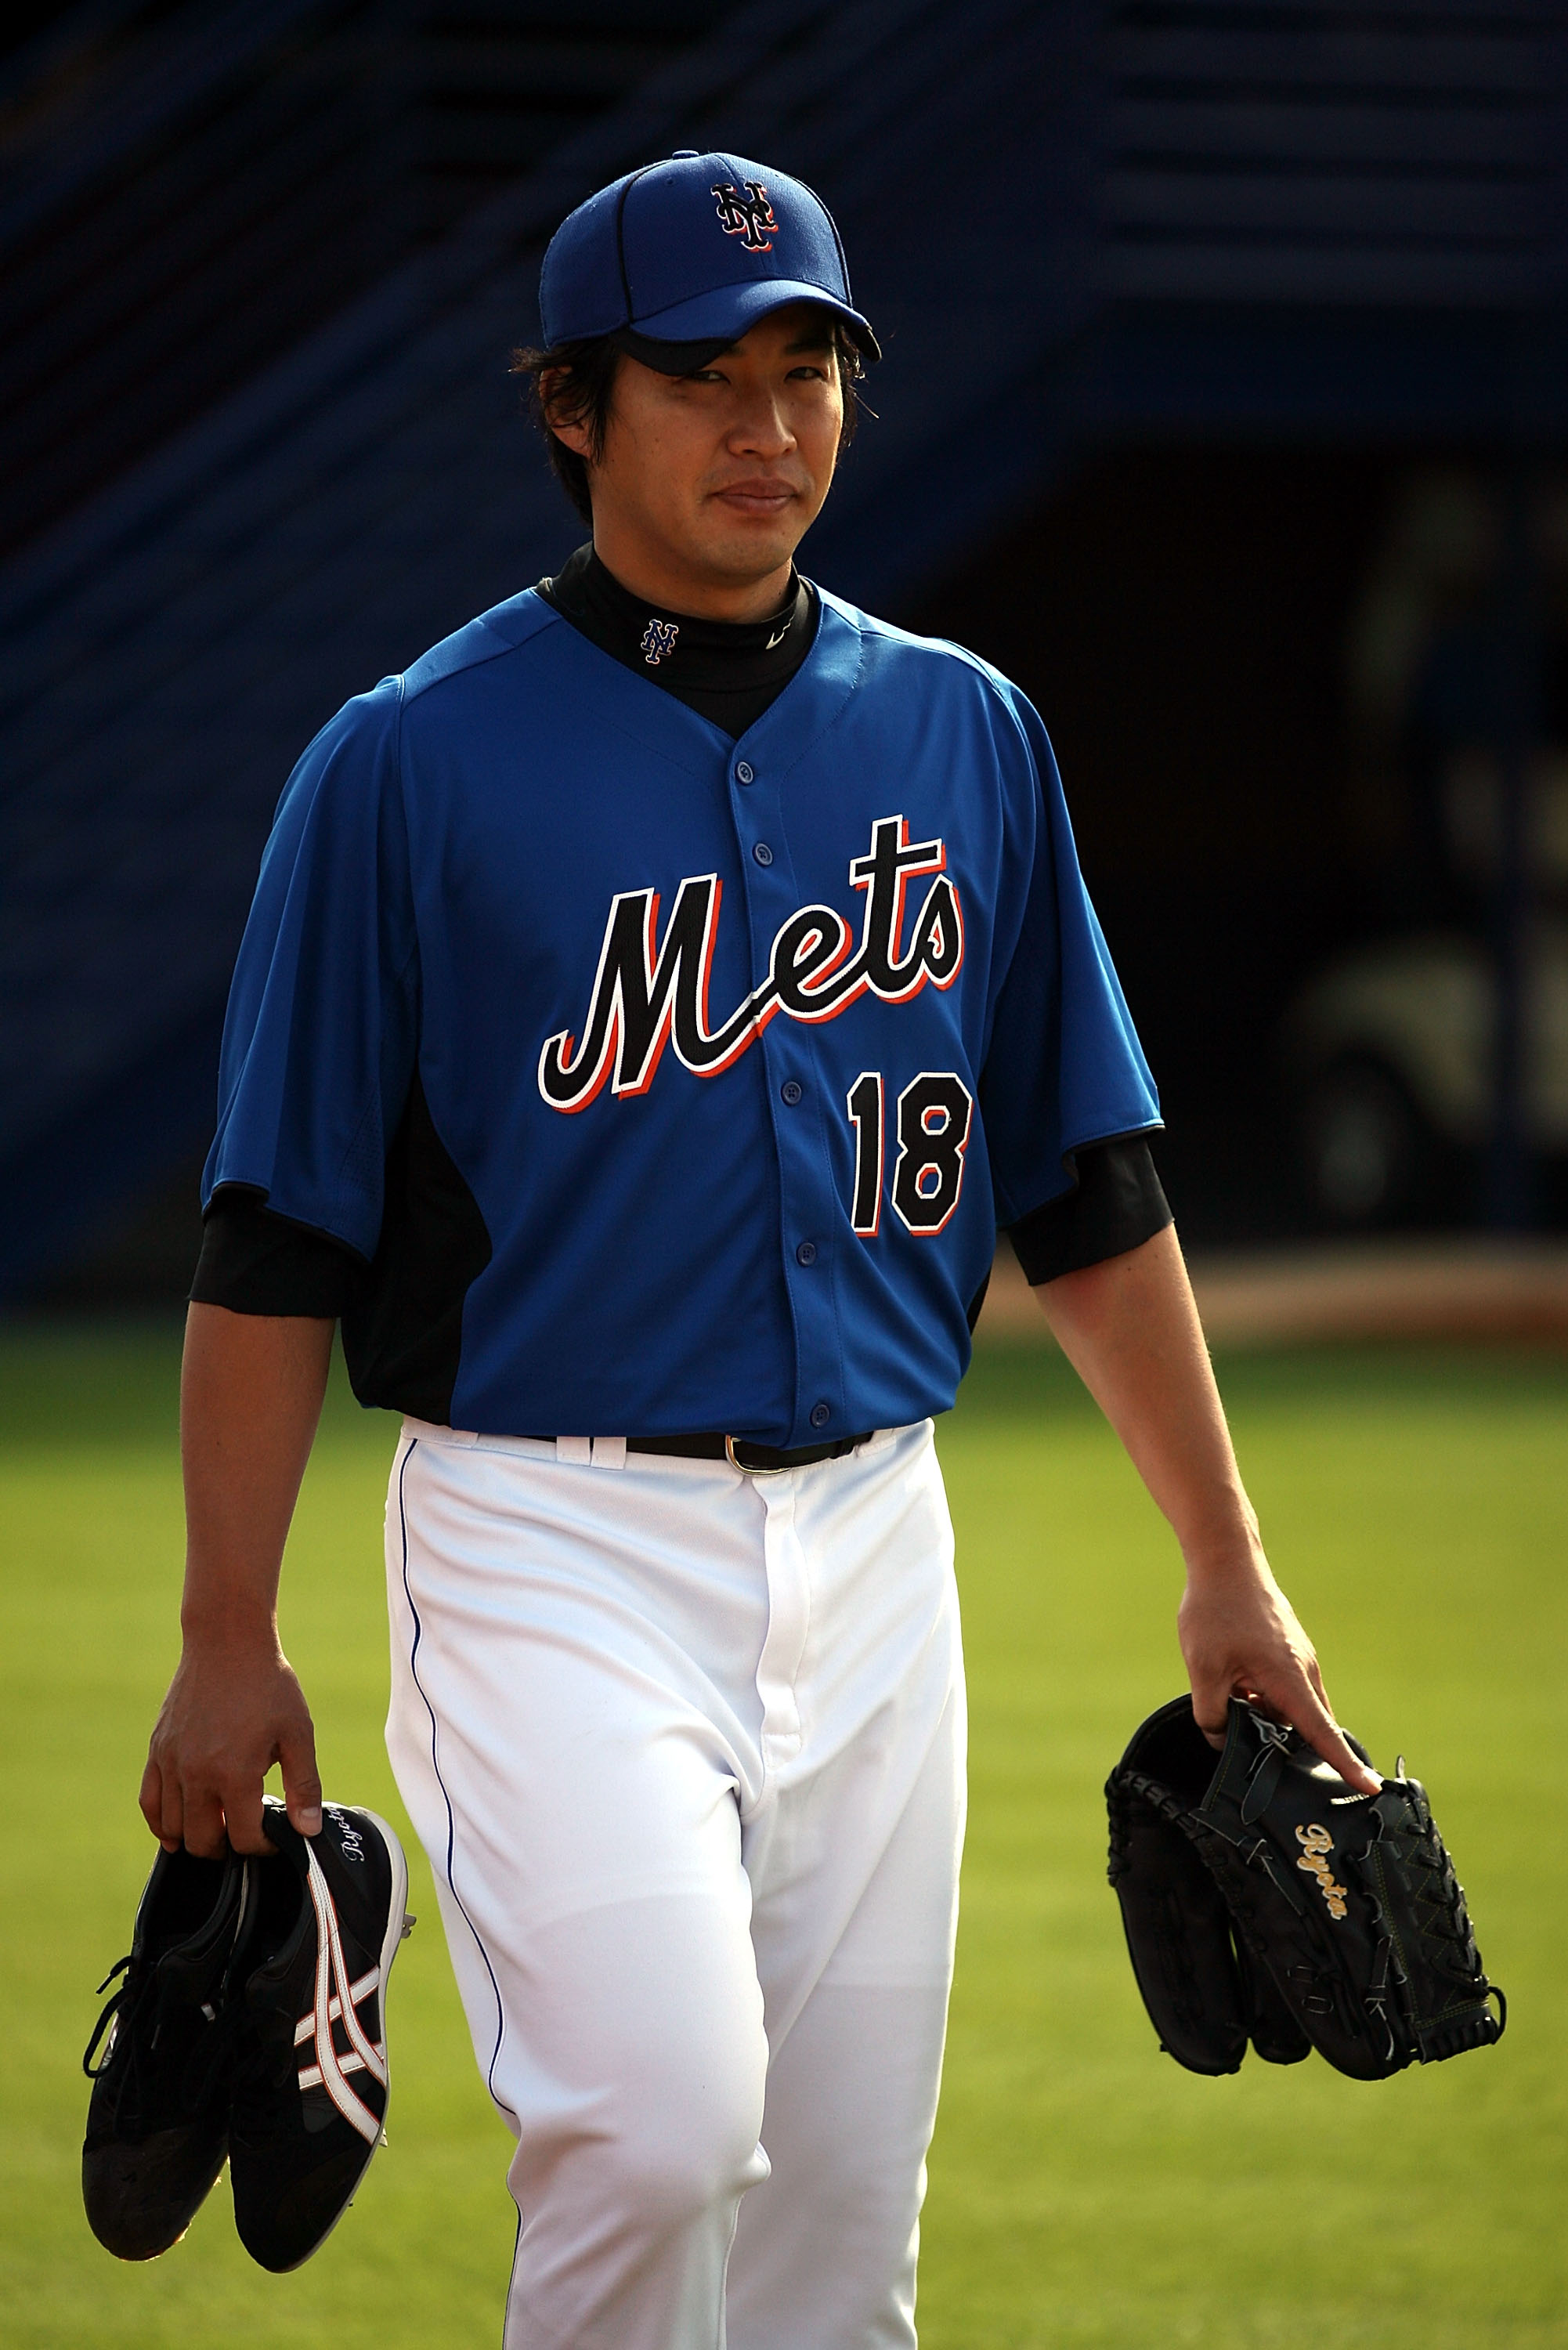 PORT ST. LUCIE, FL - FEBRUARY 17: Pitcher Ryota Igarashi #18 of the New York Mets works out during spring training at Tradition Field on February 17, 2011 in Port St. Lucie, Florida.  (Photo by Marc Serota/Getty Images)